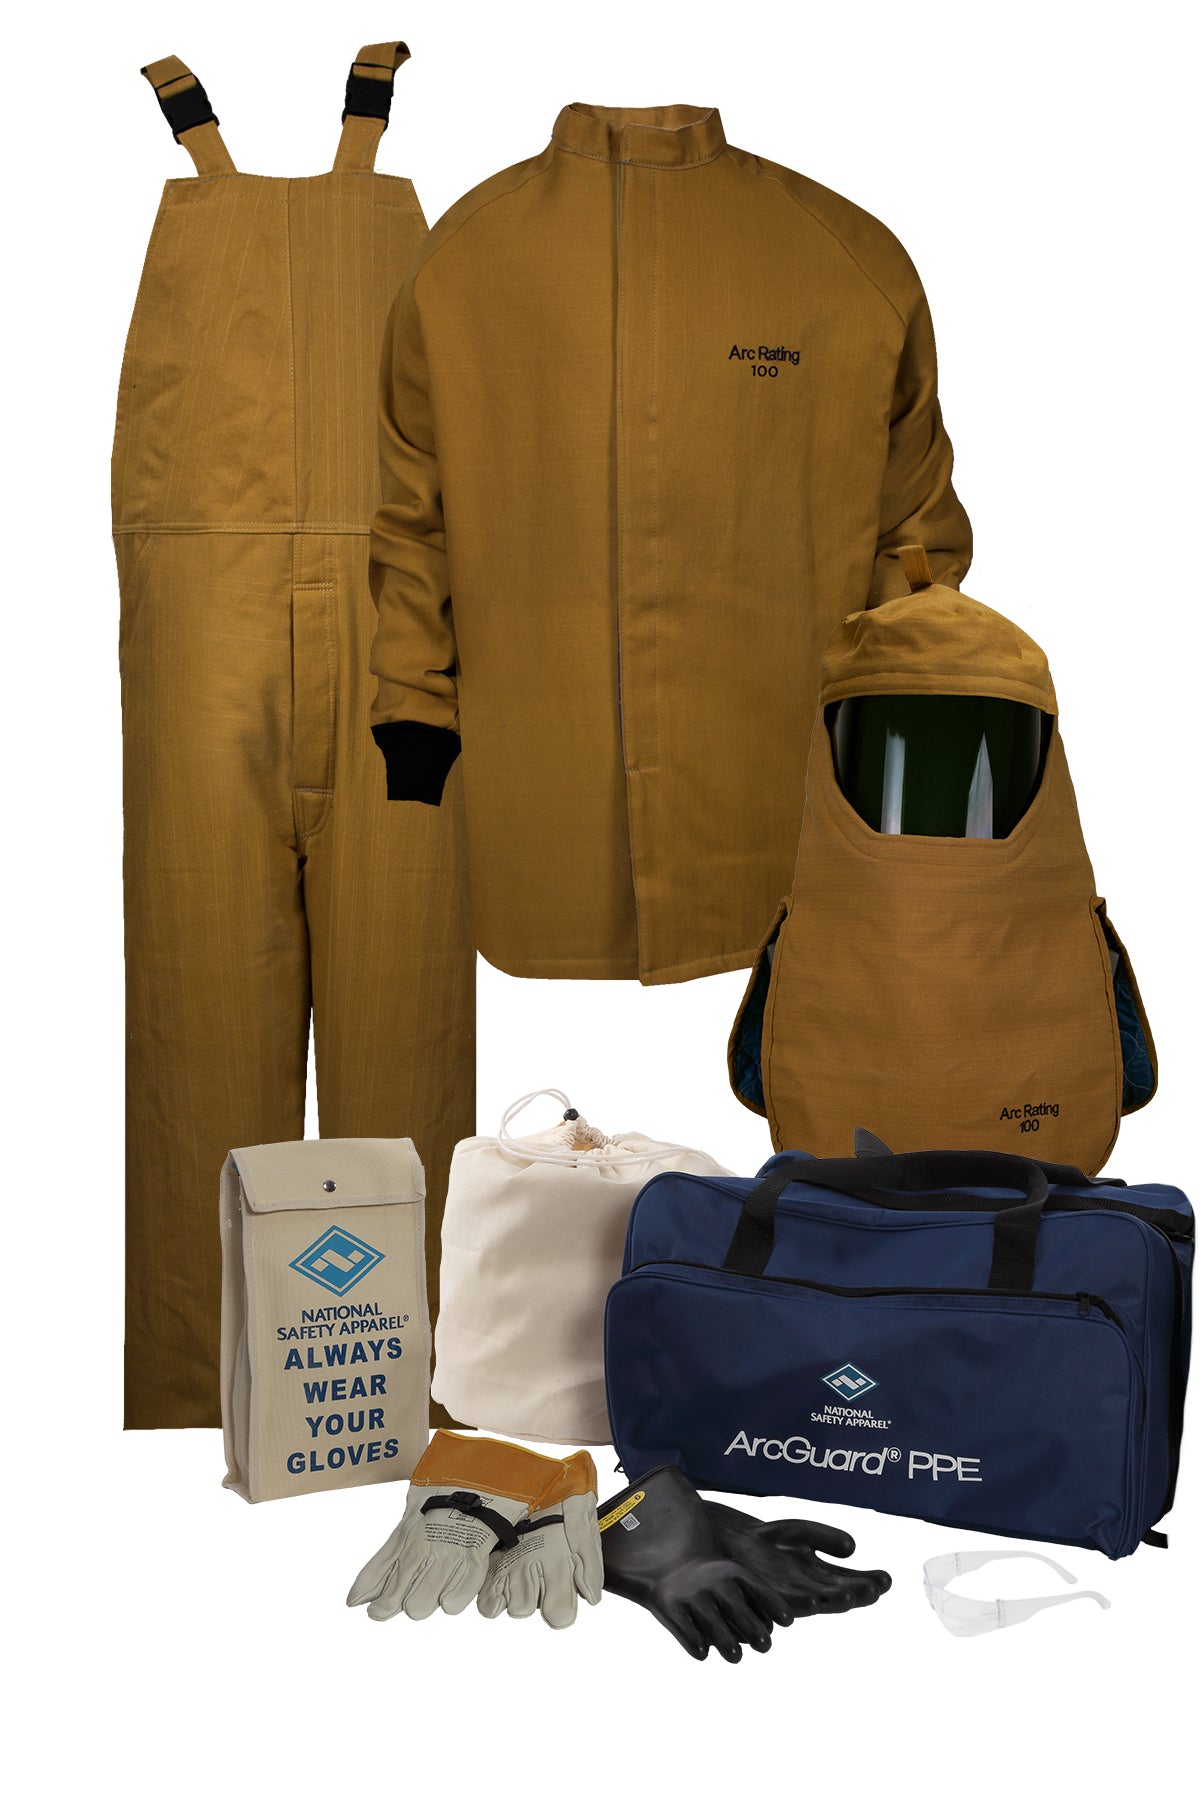 Enespro ArcGuard 100 cal Arc Flash Kit with Voltage Gloves